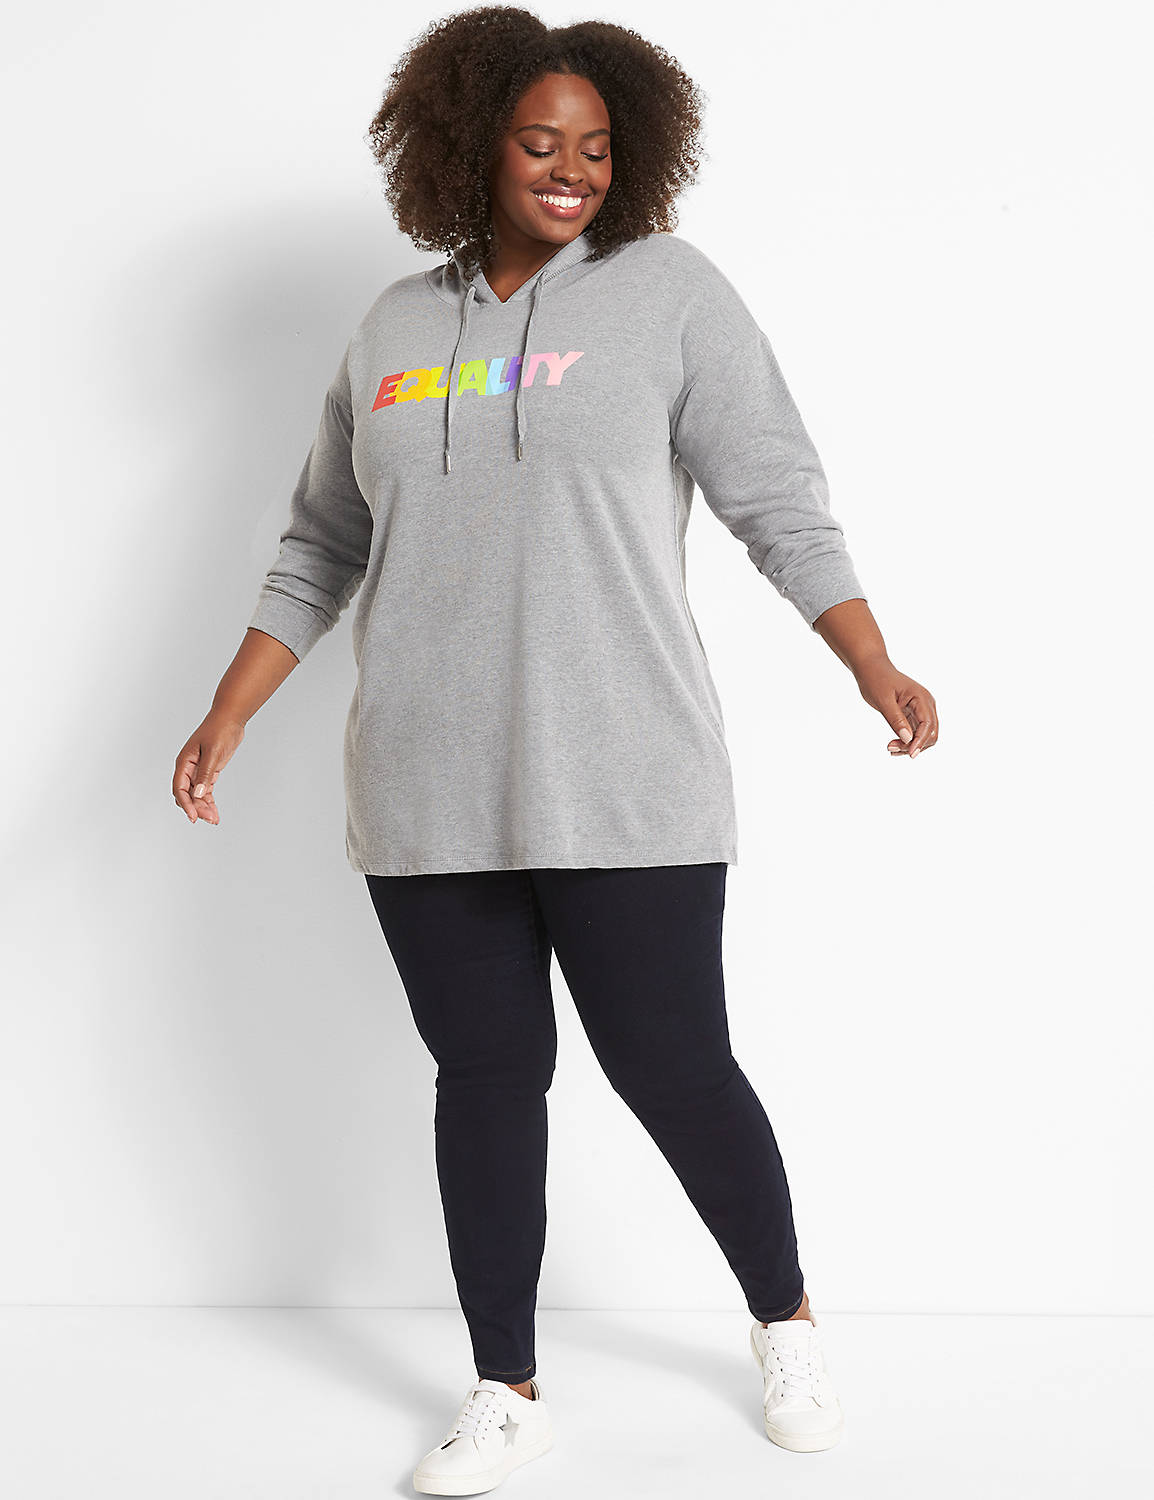 Long Sleeve Drop Shoulder Hoodie Tunic Graphic: Equality Pride 1123088:BTC30 Medium Heather Gray:10/12 Product Image 3